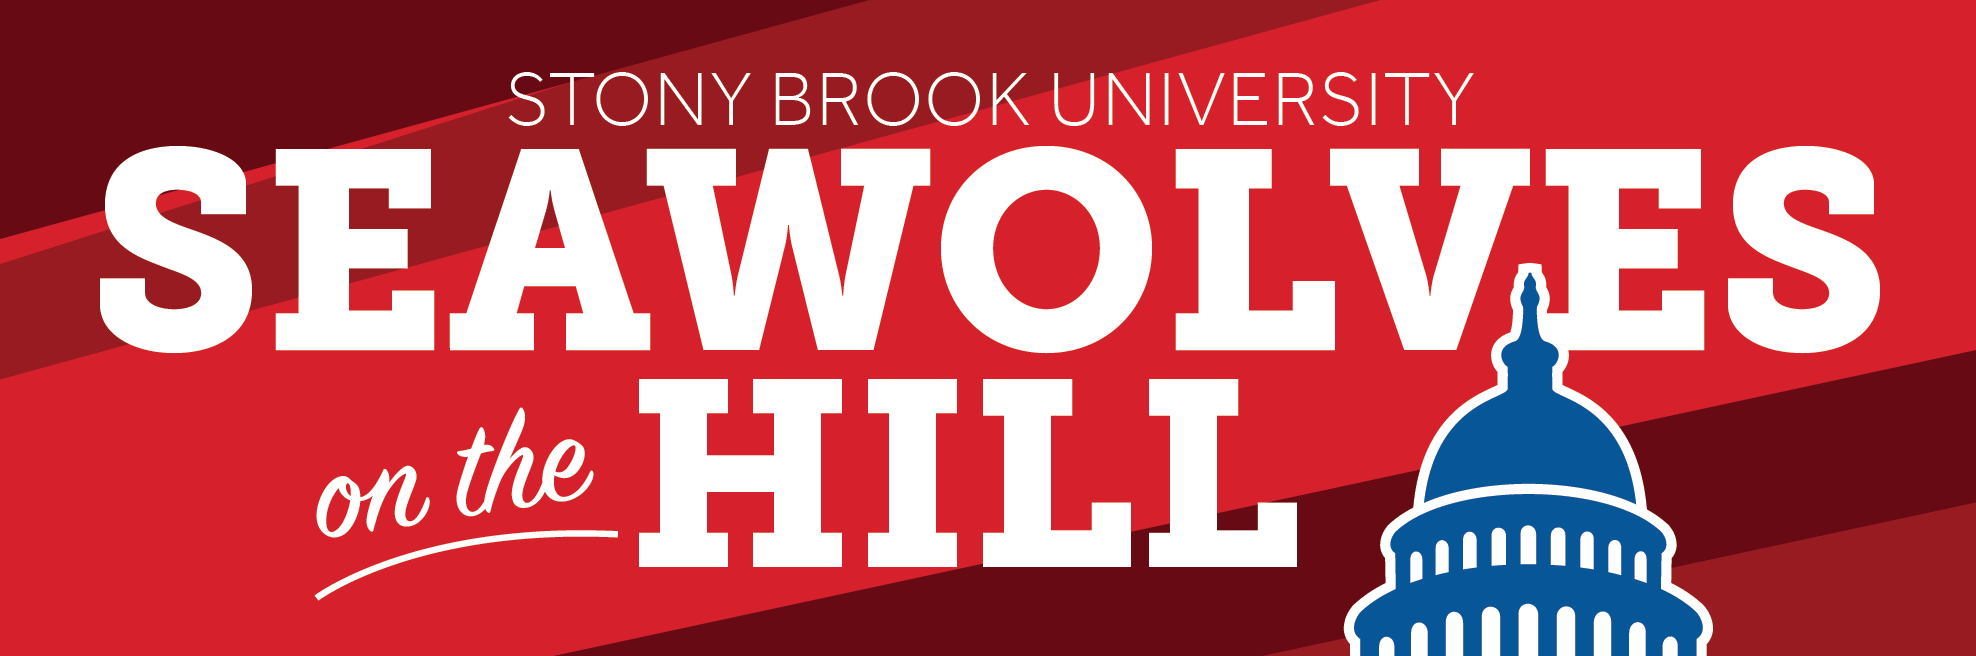 seawolves on the hill